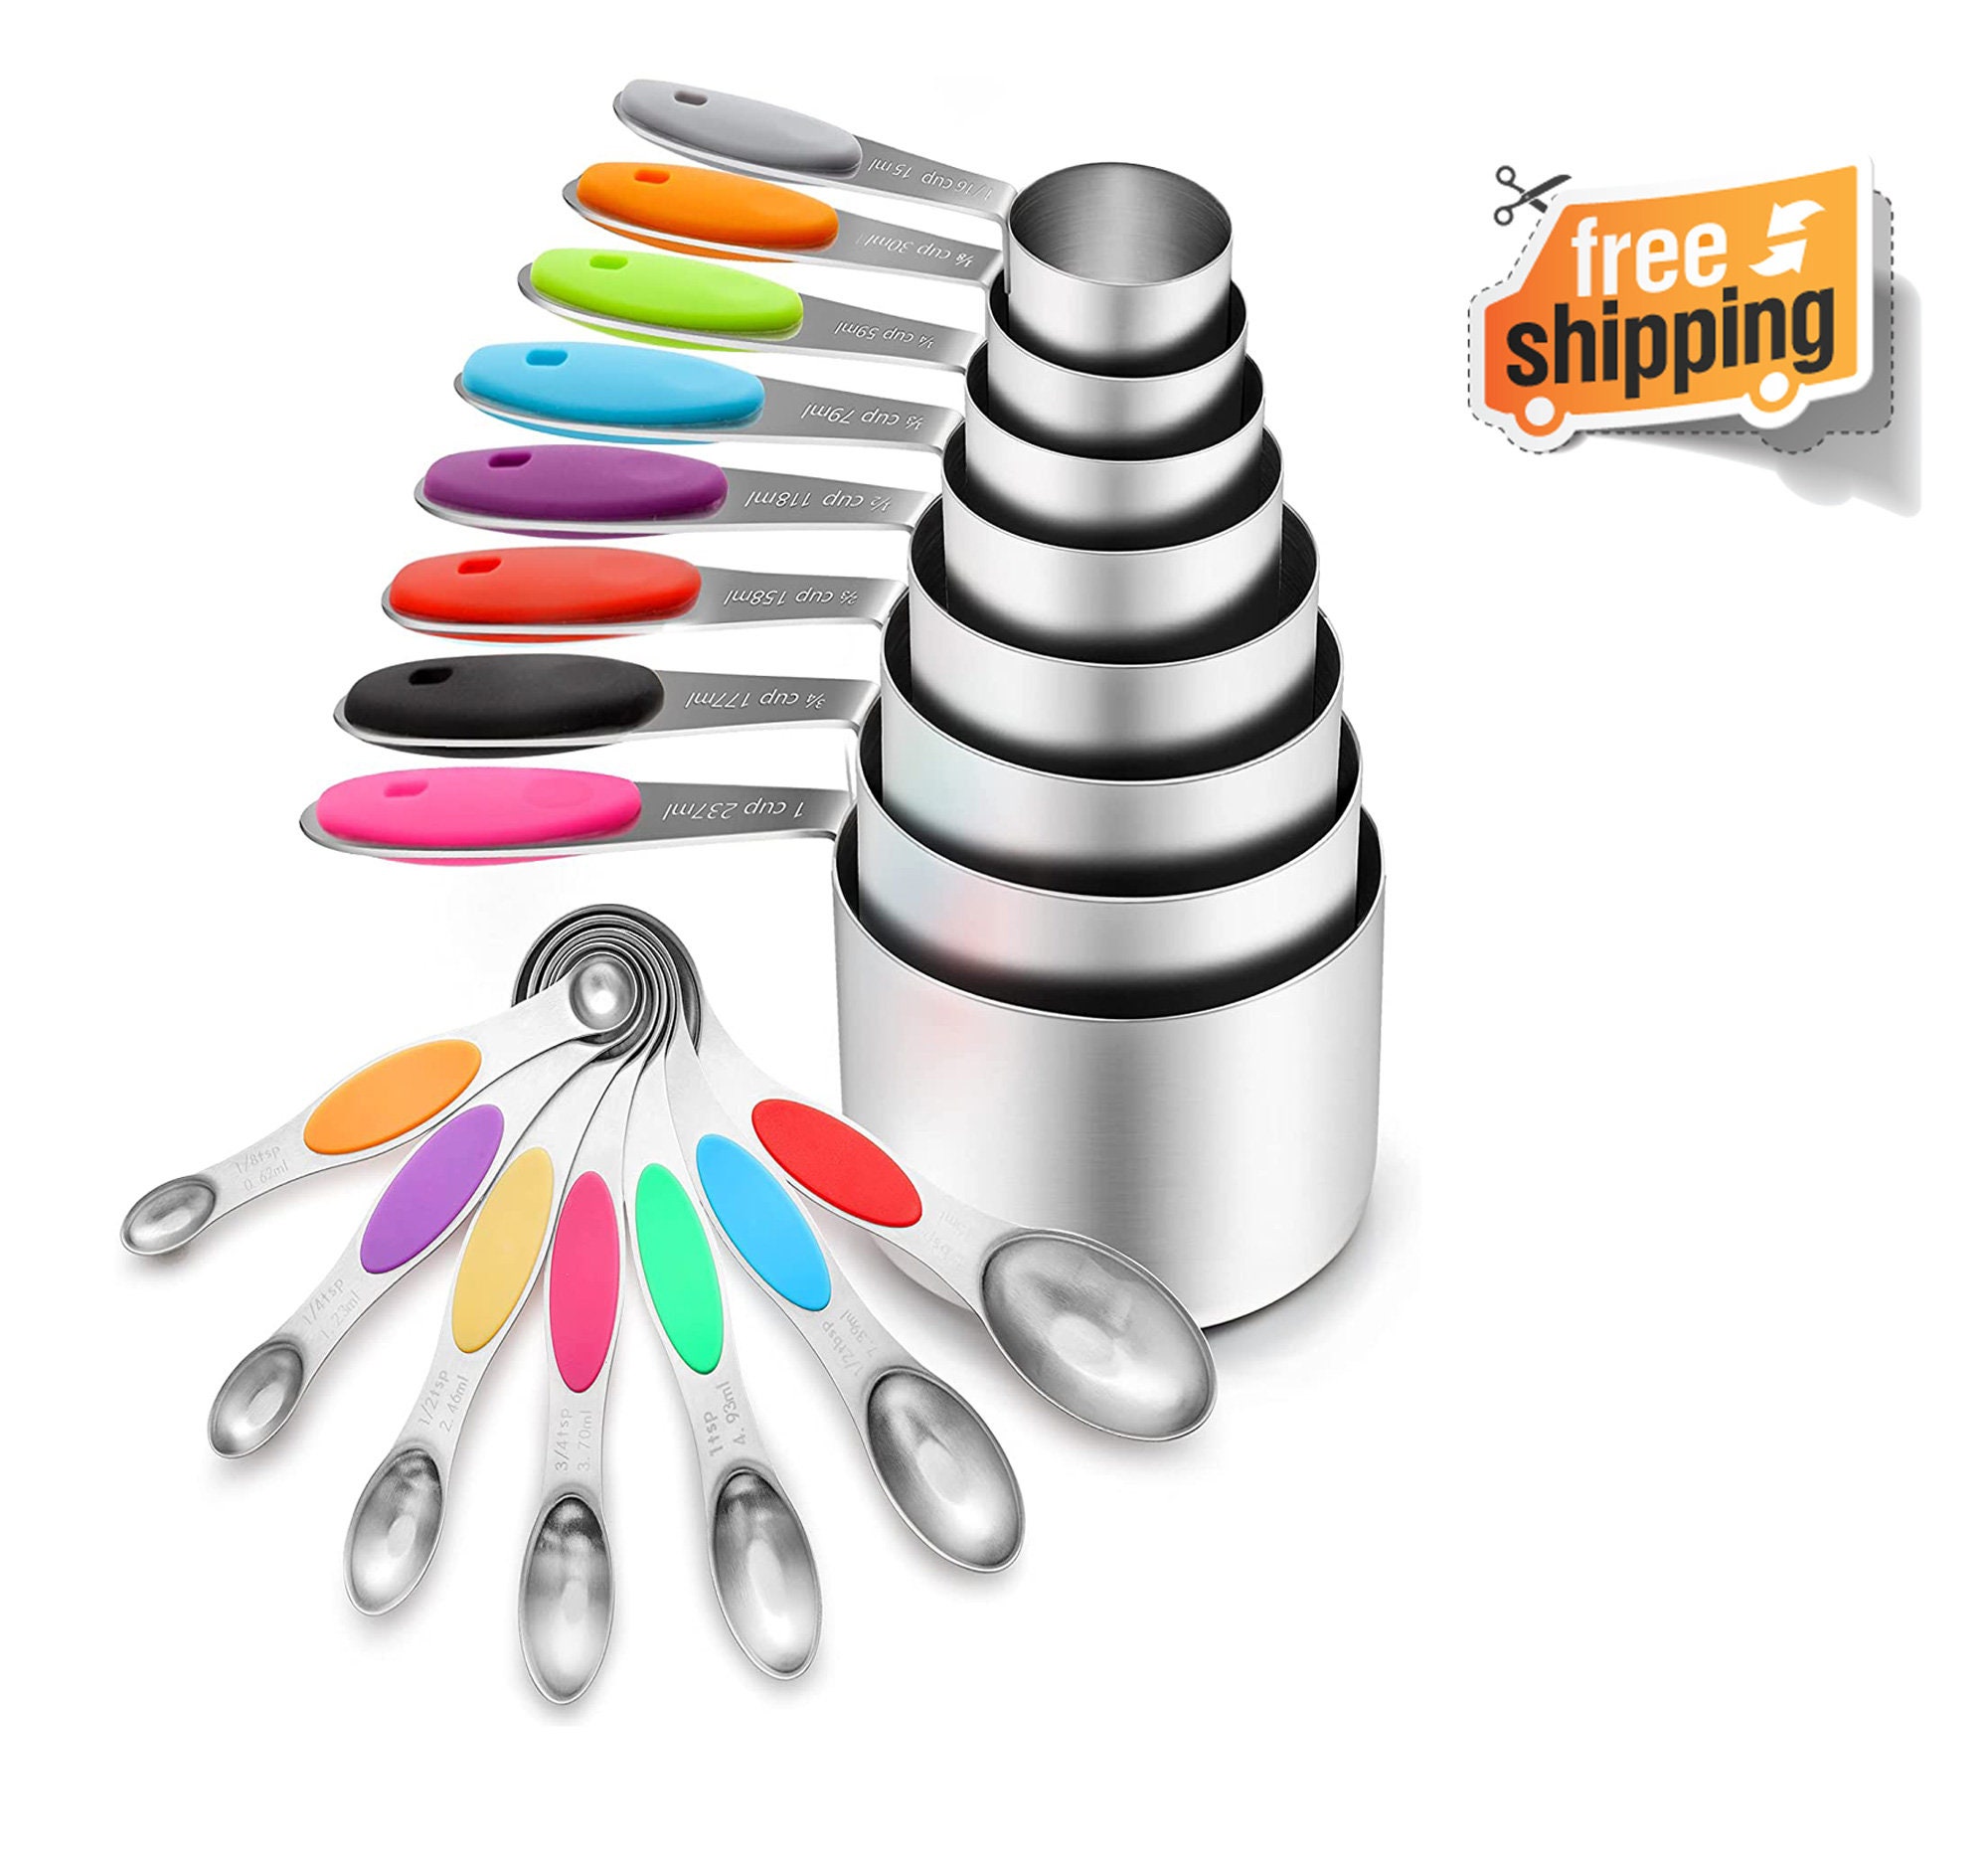 16 Piece Stainless Steel Measuring Cups and Spoons Set